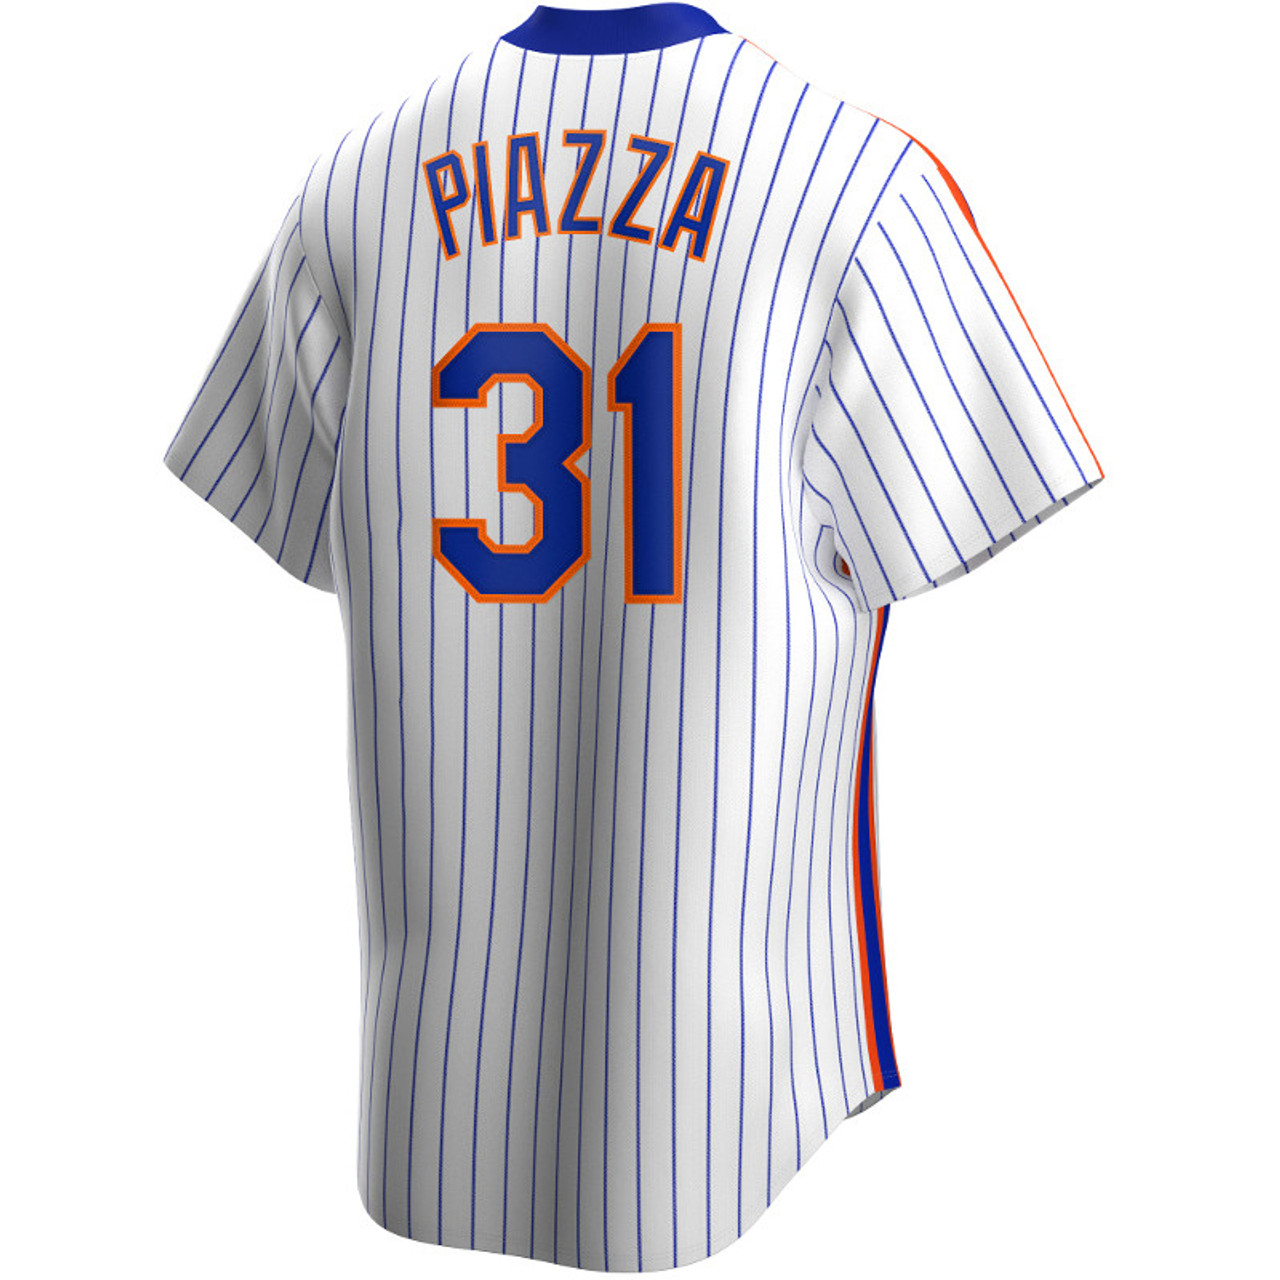 new york mets mike piazza jersey